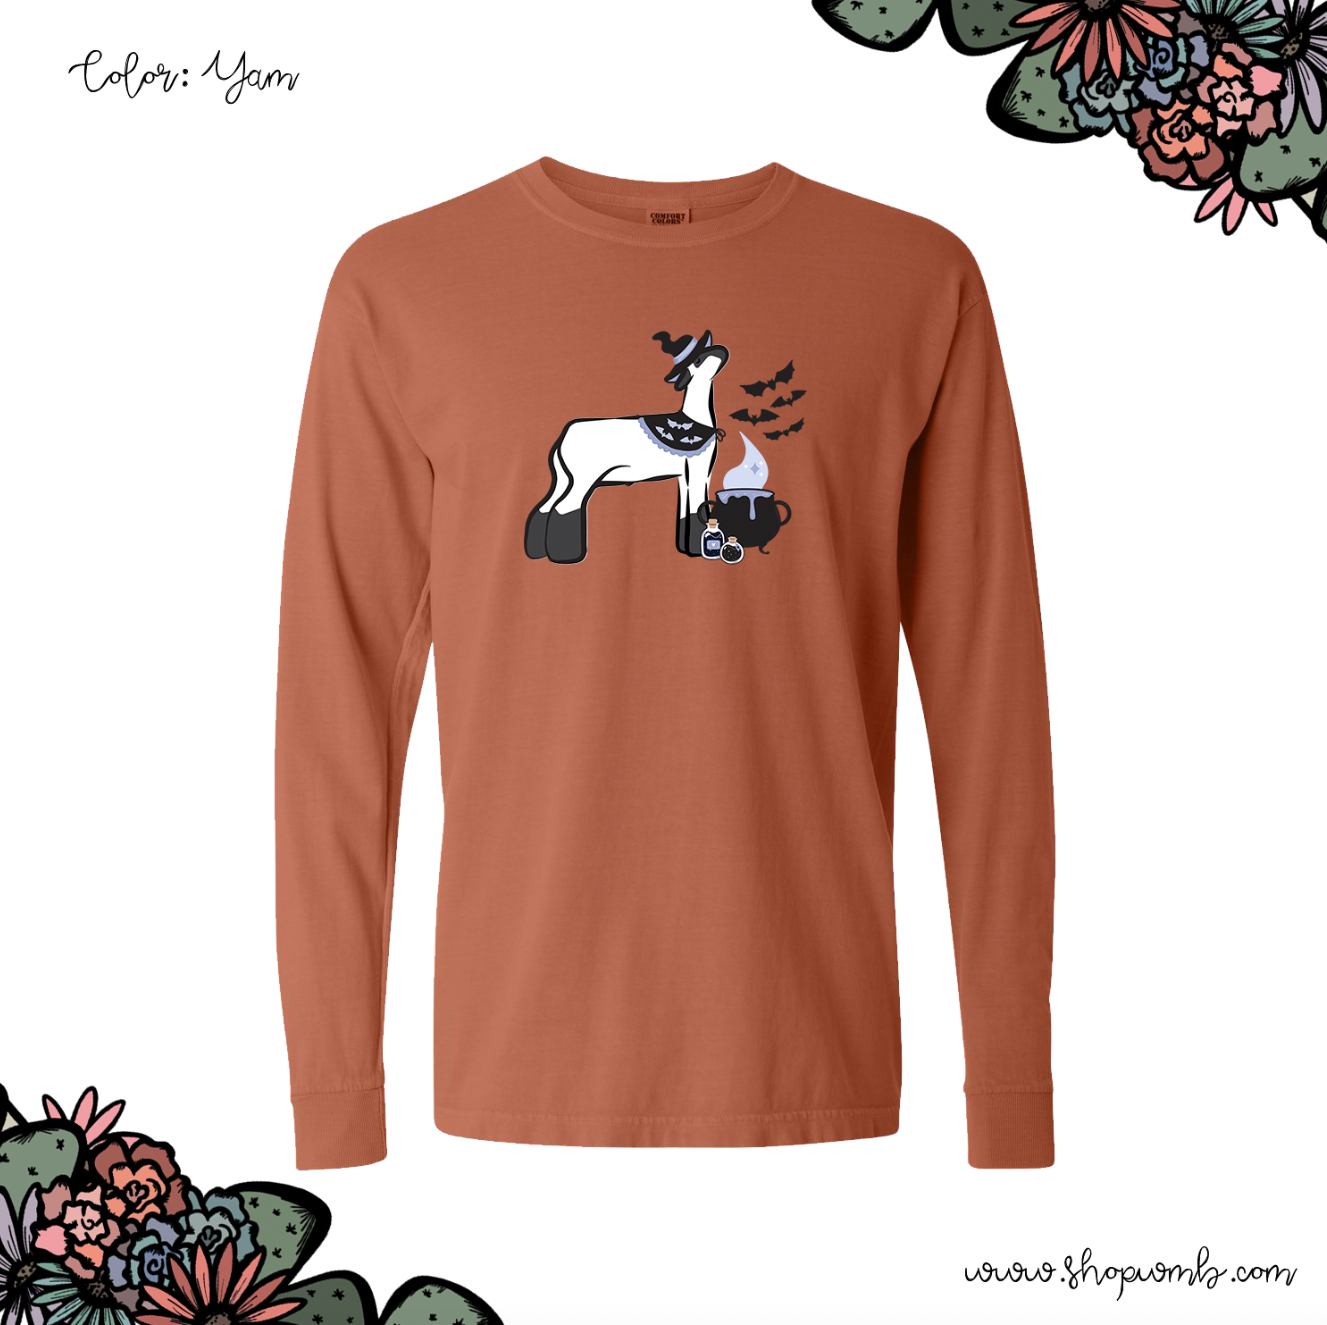 Witch Lamb LONG SLEEVE T-Shirt (S-3XL) - Multiple Colors!